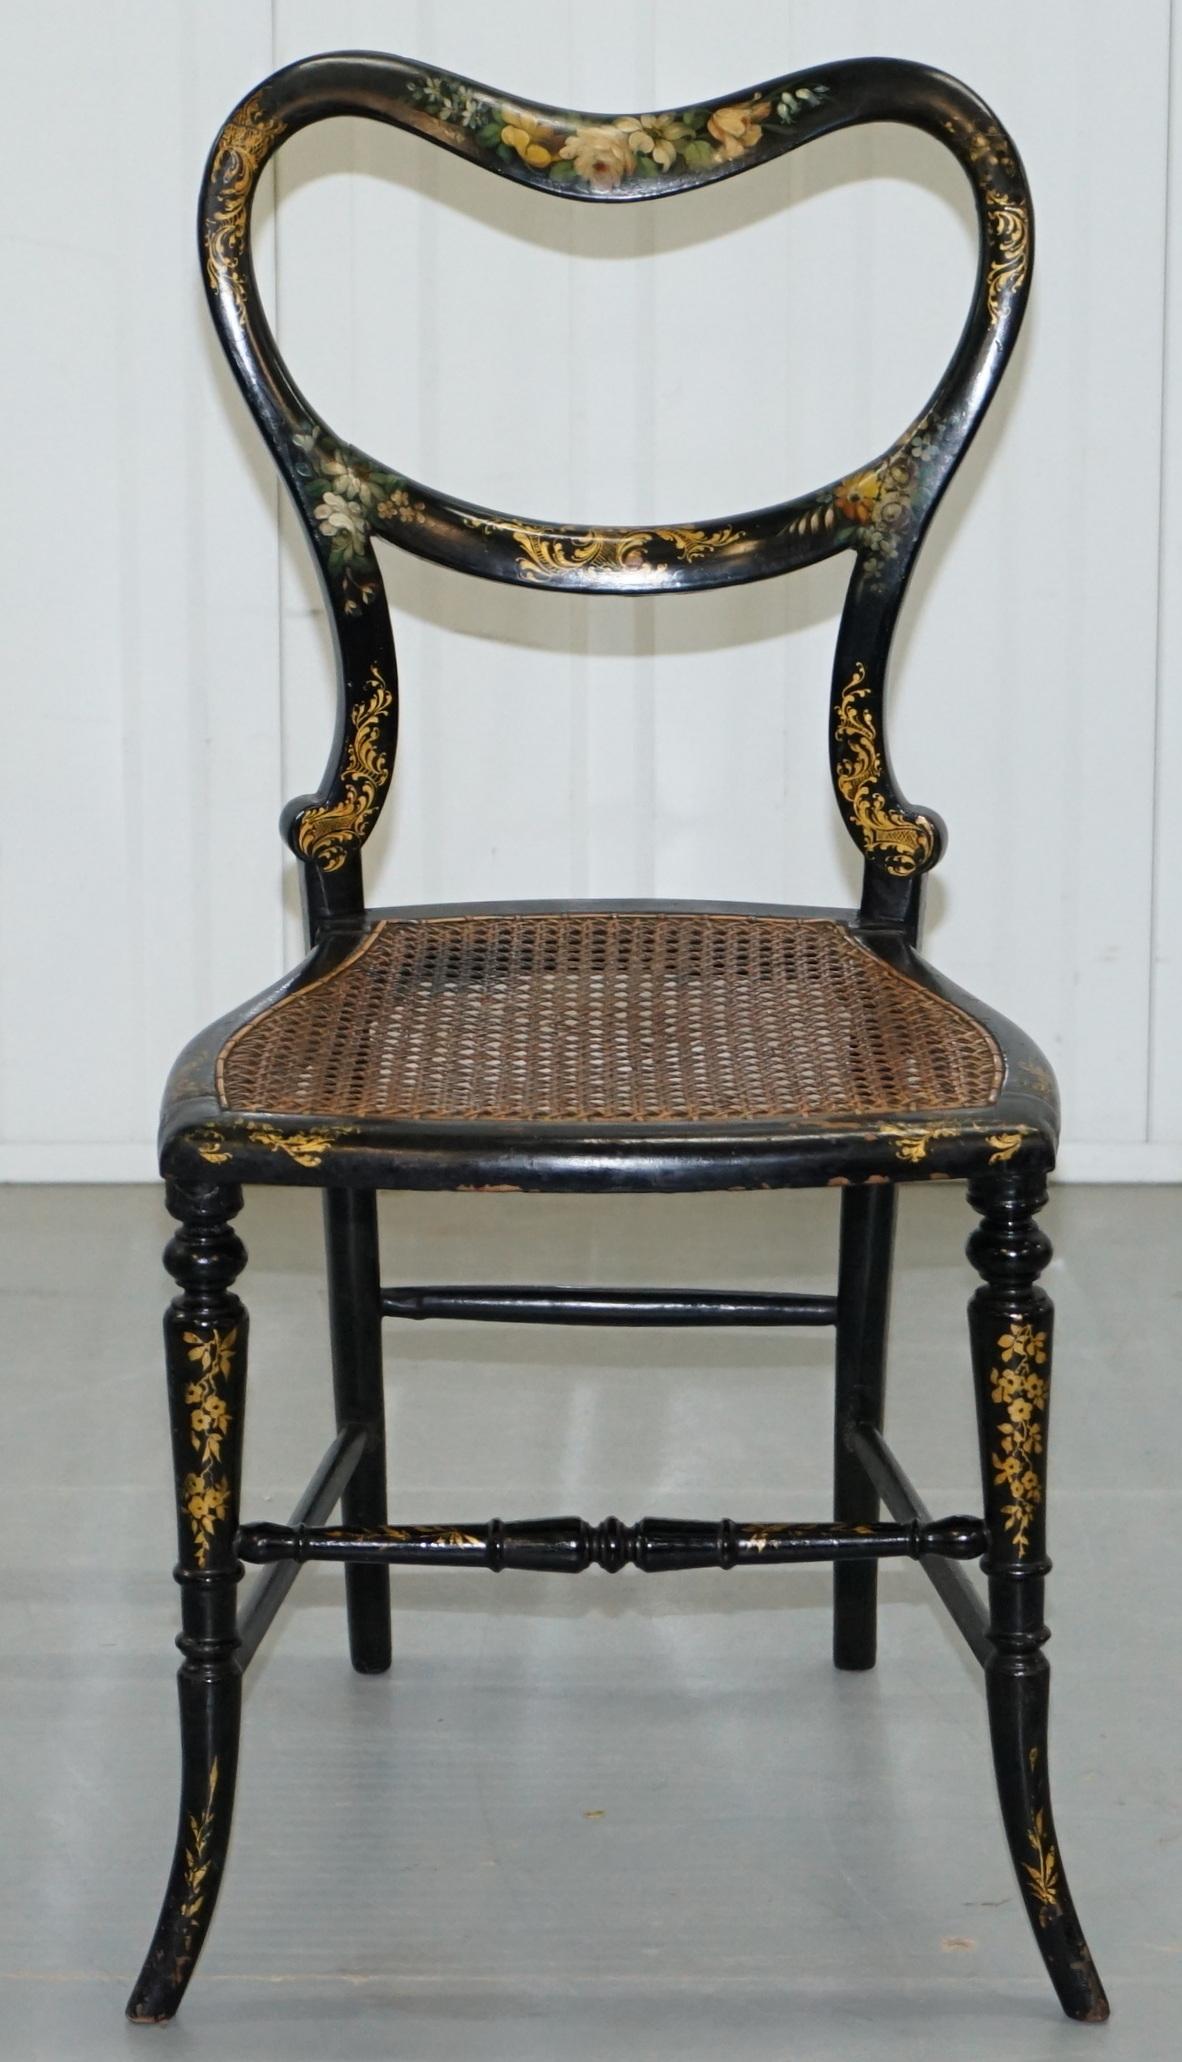 We are delighted to offer for sale this lovely mid-18th century George III style chinoiserie black ebonised occasional chair made in the very early Victorian era, circa 1840.

I absolutely love this chair, it is a very rare find, the paint work is